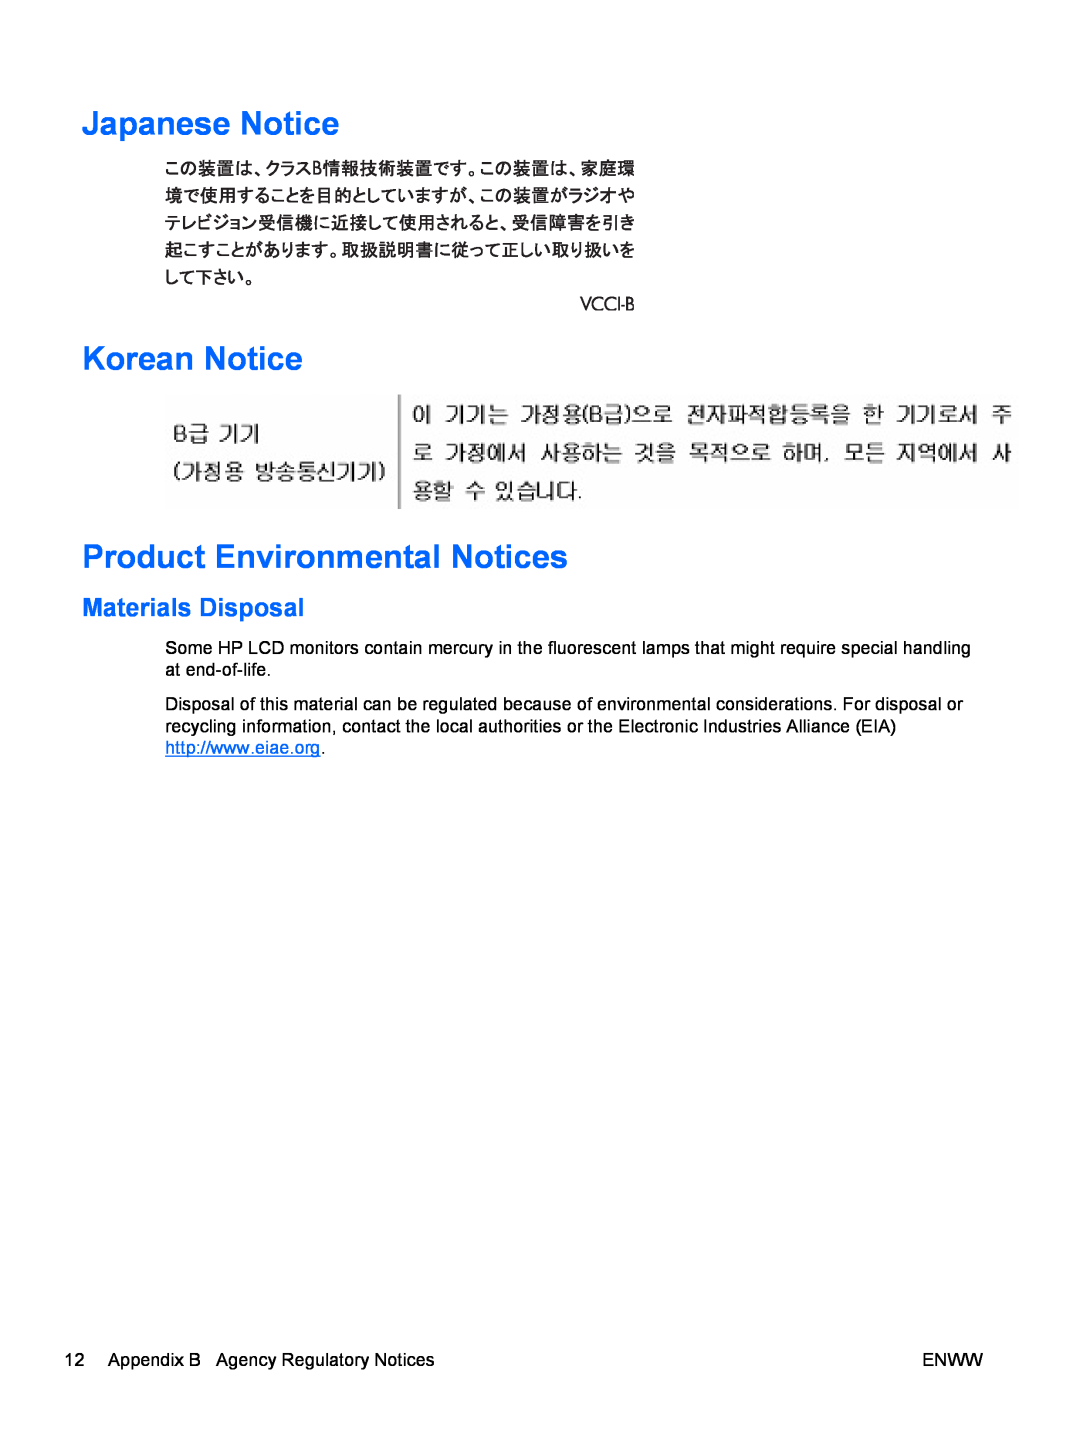 HP rp5800 Retail System manual Japanese Notice Korean Notice Product Environmental Notices, Materials Disposal 